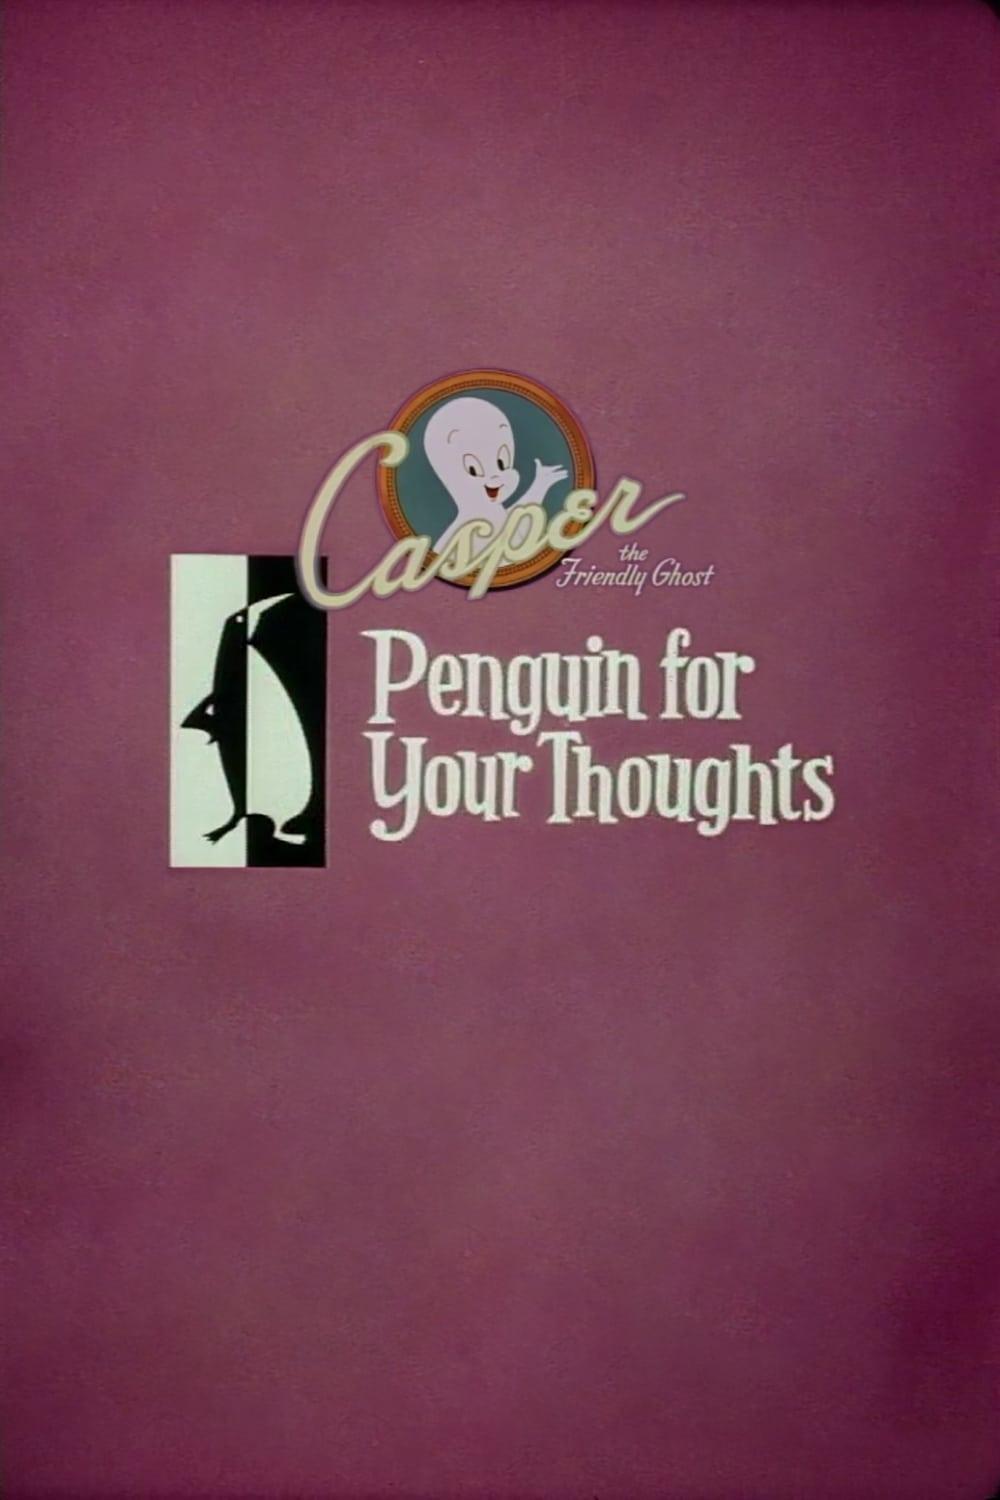 Penguin for Your Thoughts poster